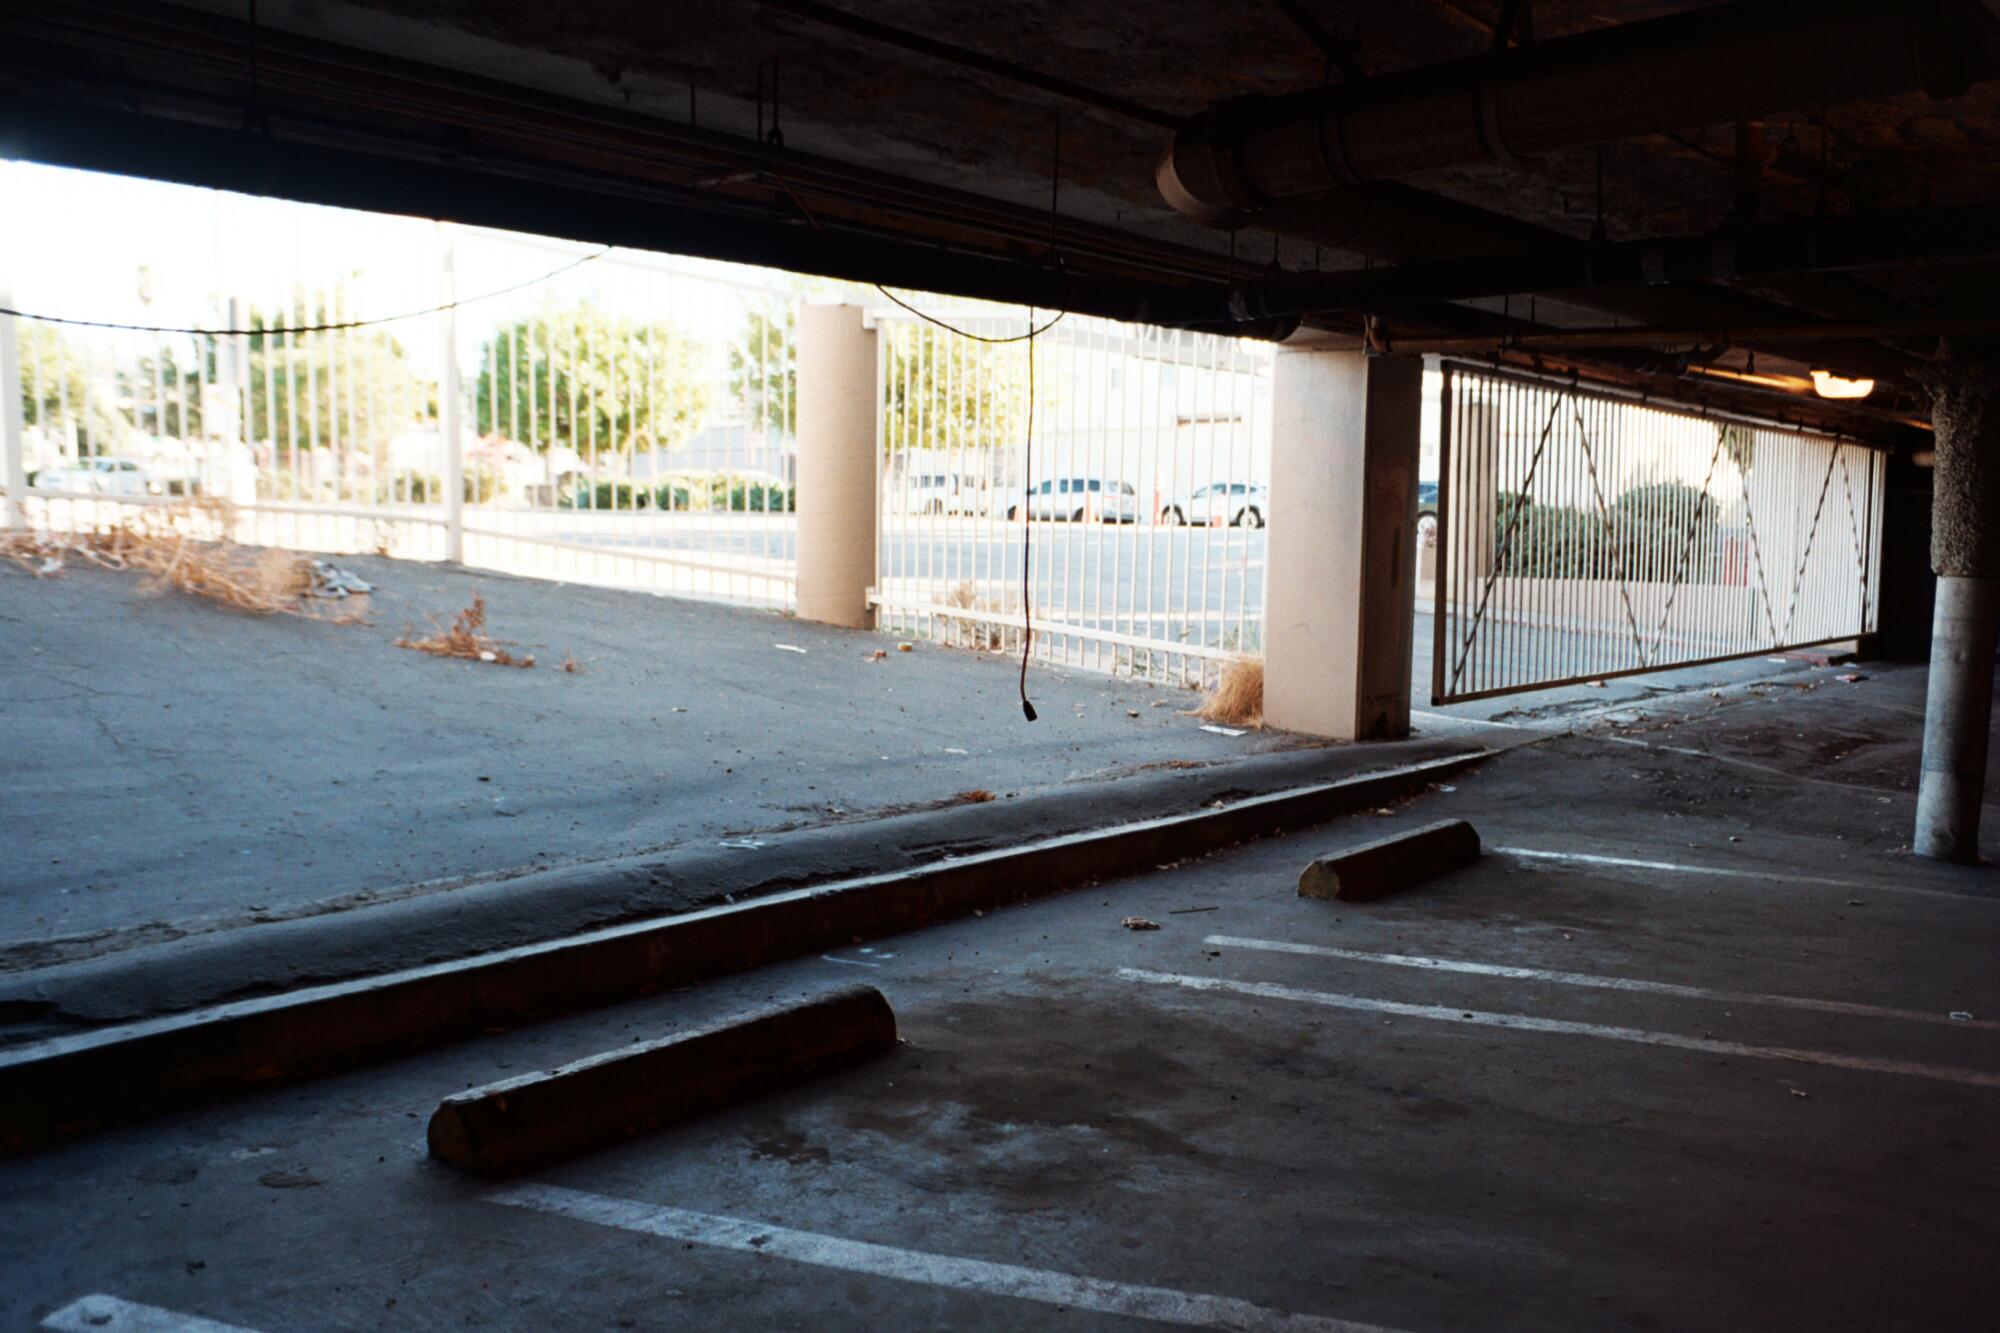 A gated, abandoned parking garage with an outdoor area